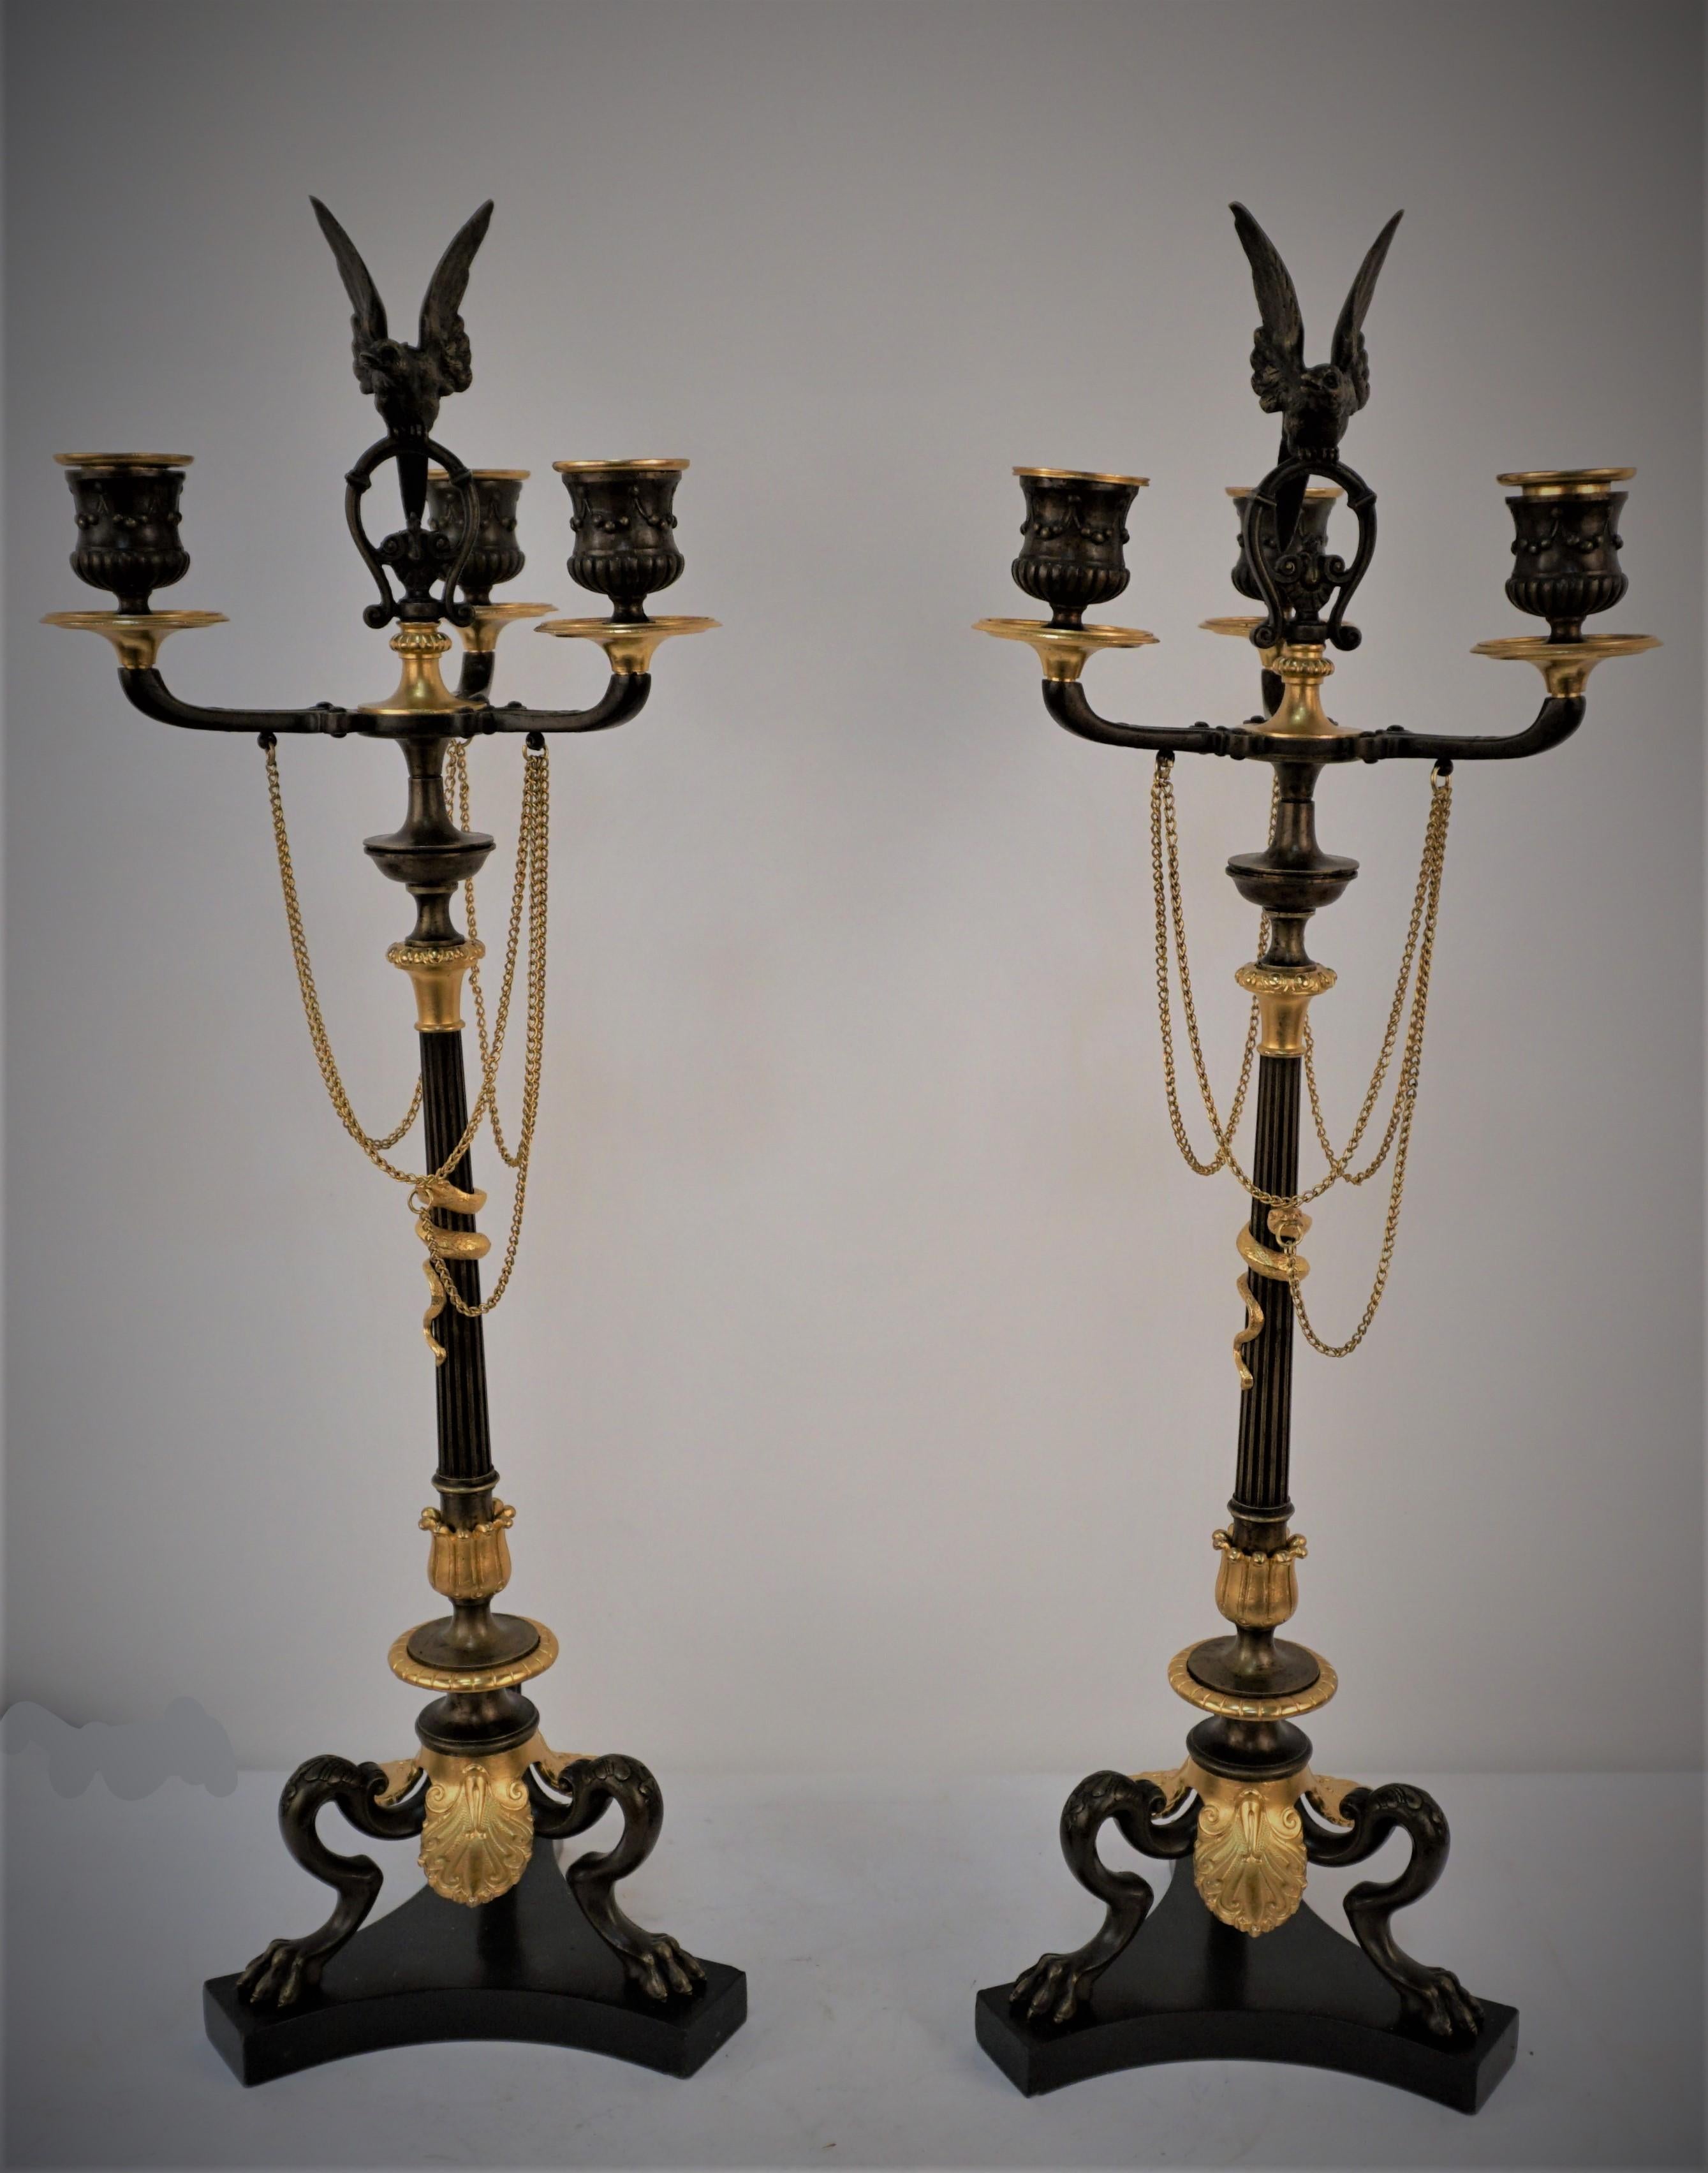 Pair of 19th Century Gilt and Oxidized Bronze Candelabra For Sale 8